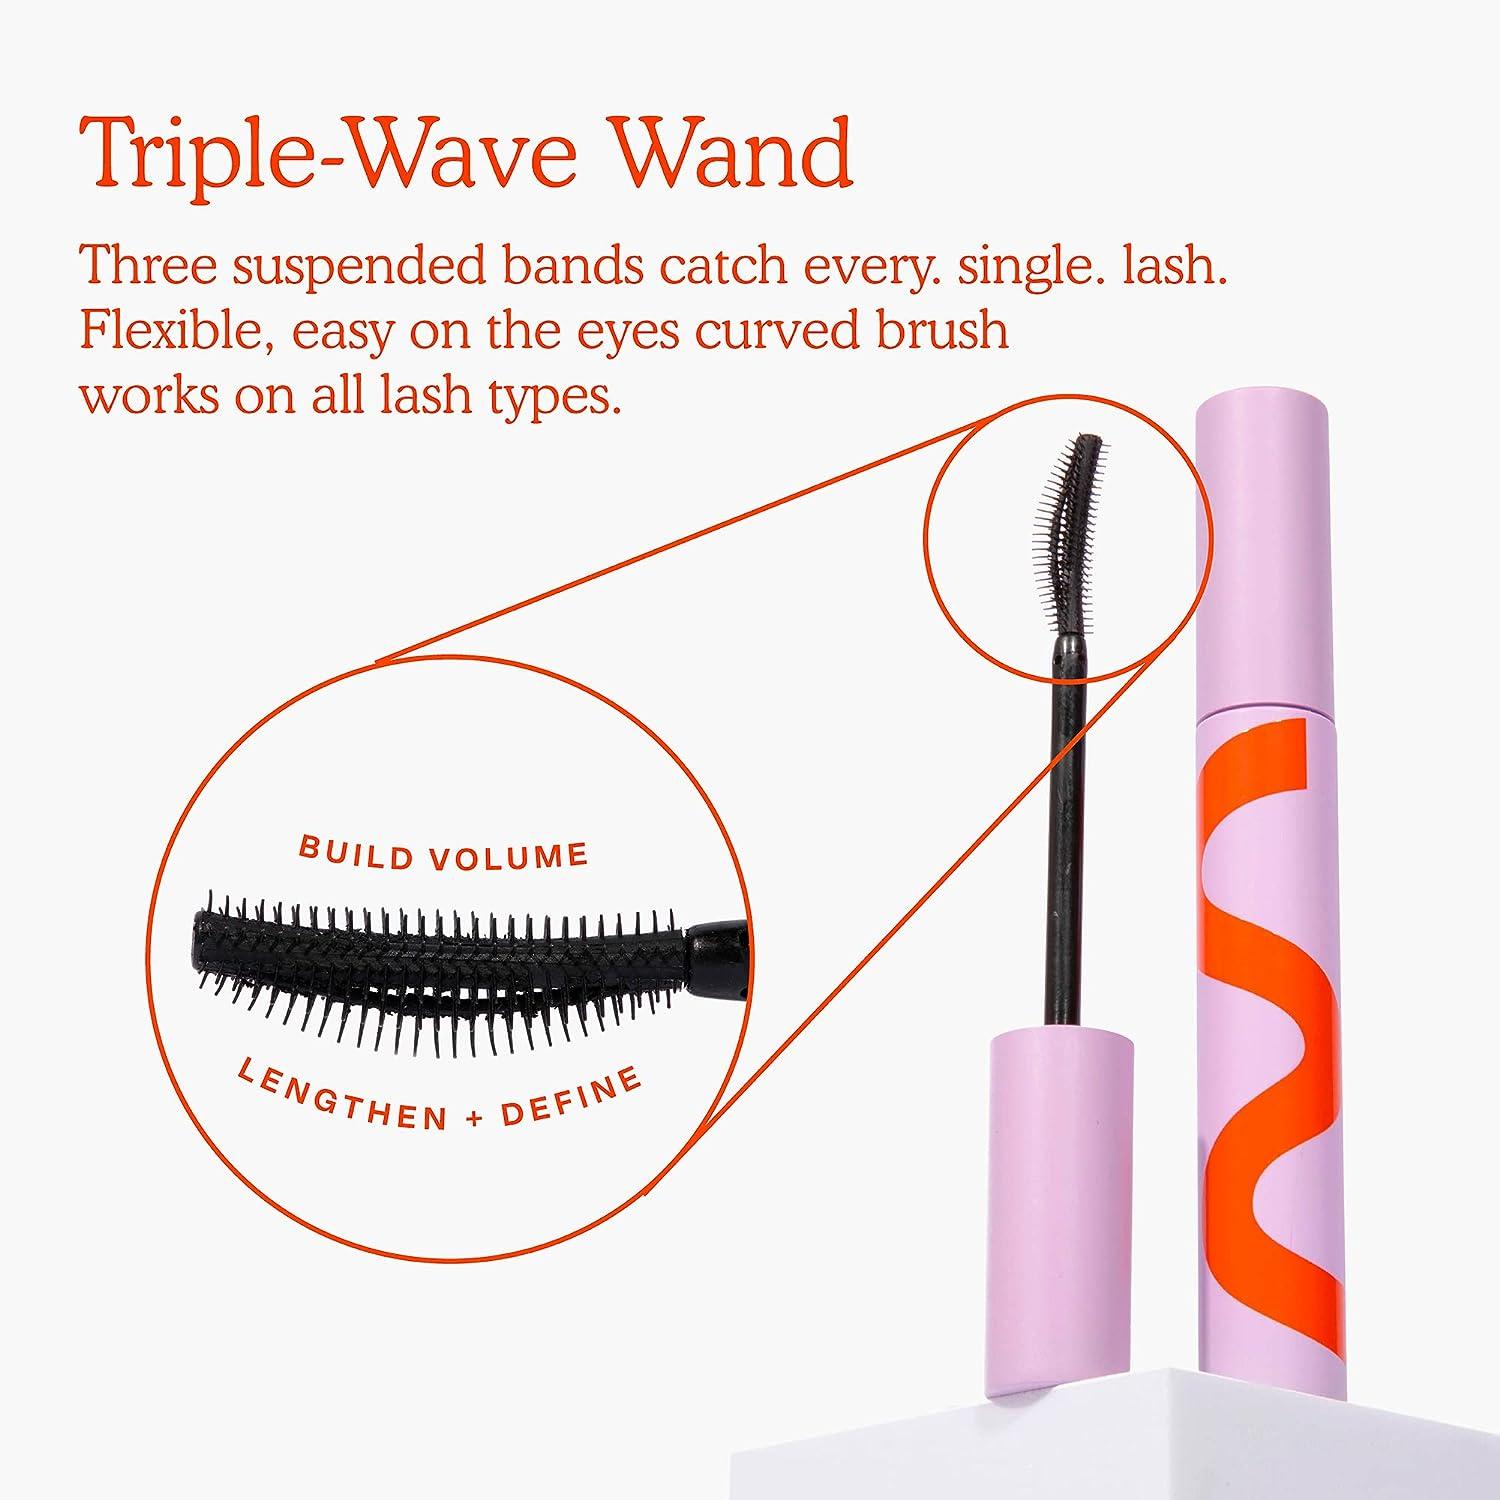 Tower 28 tripal wand mascara best for curlings 